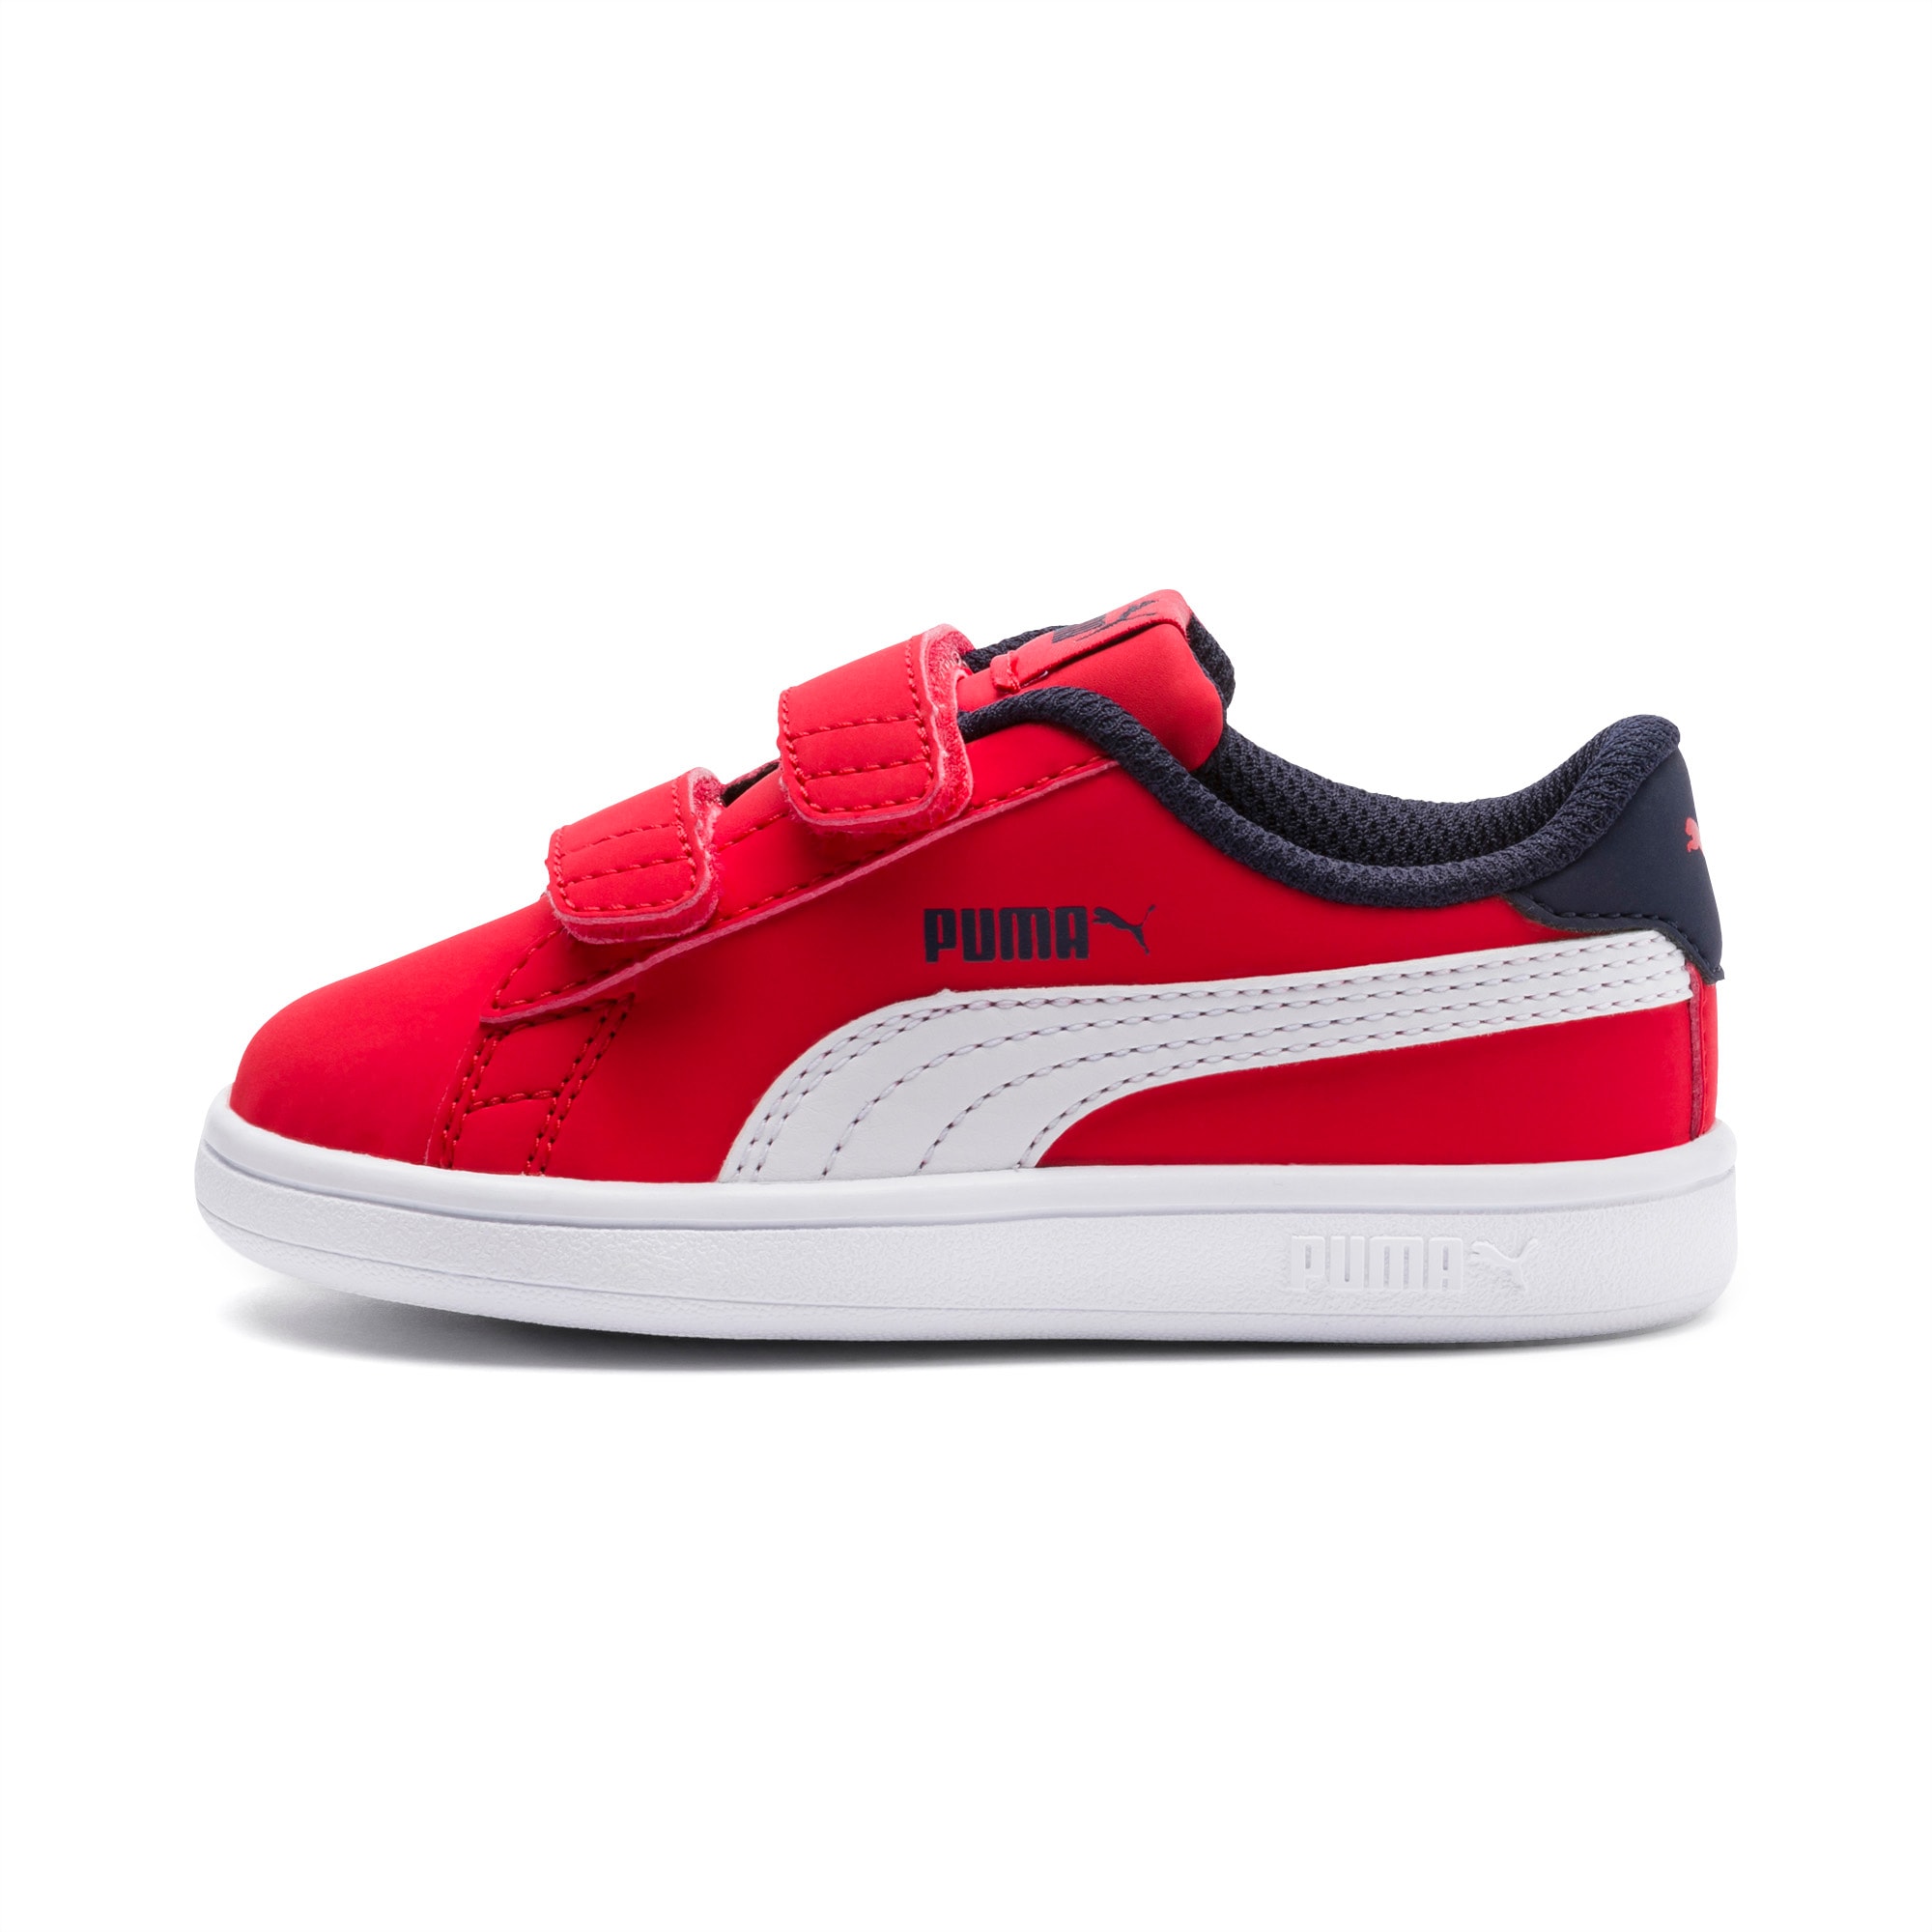 red puma toddler shoes